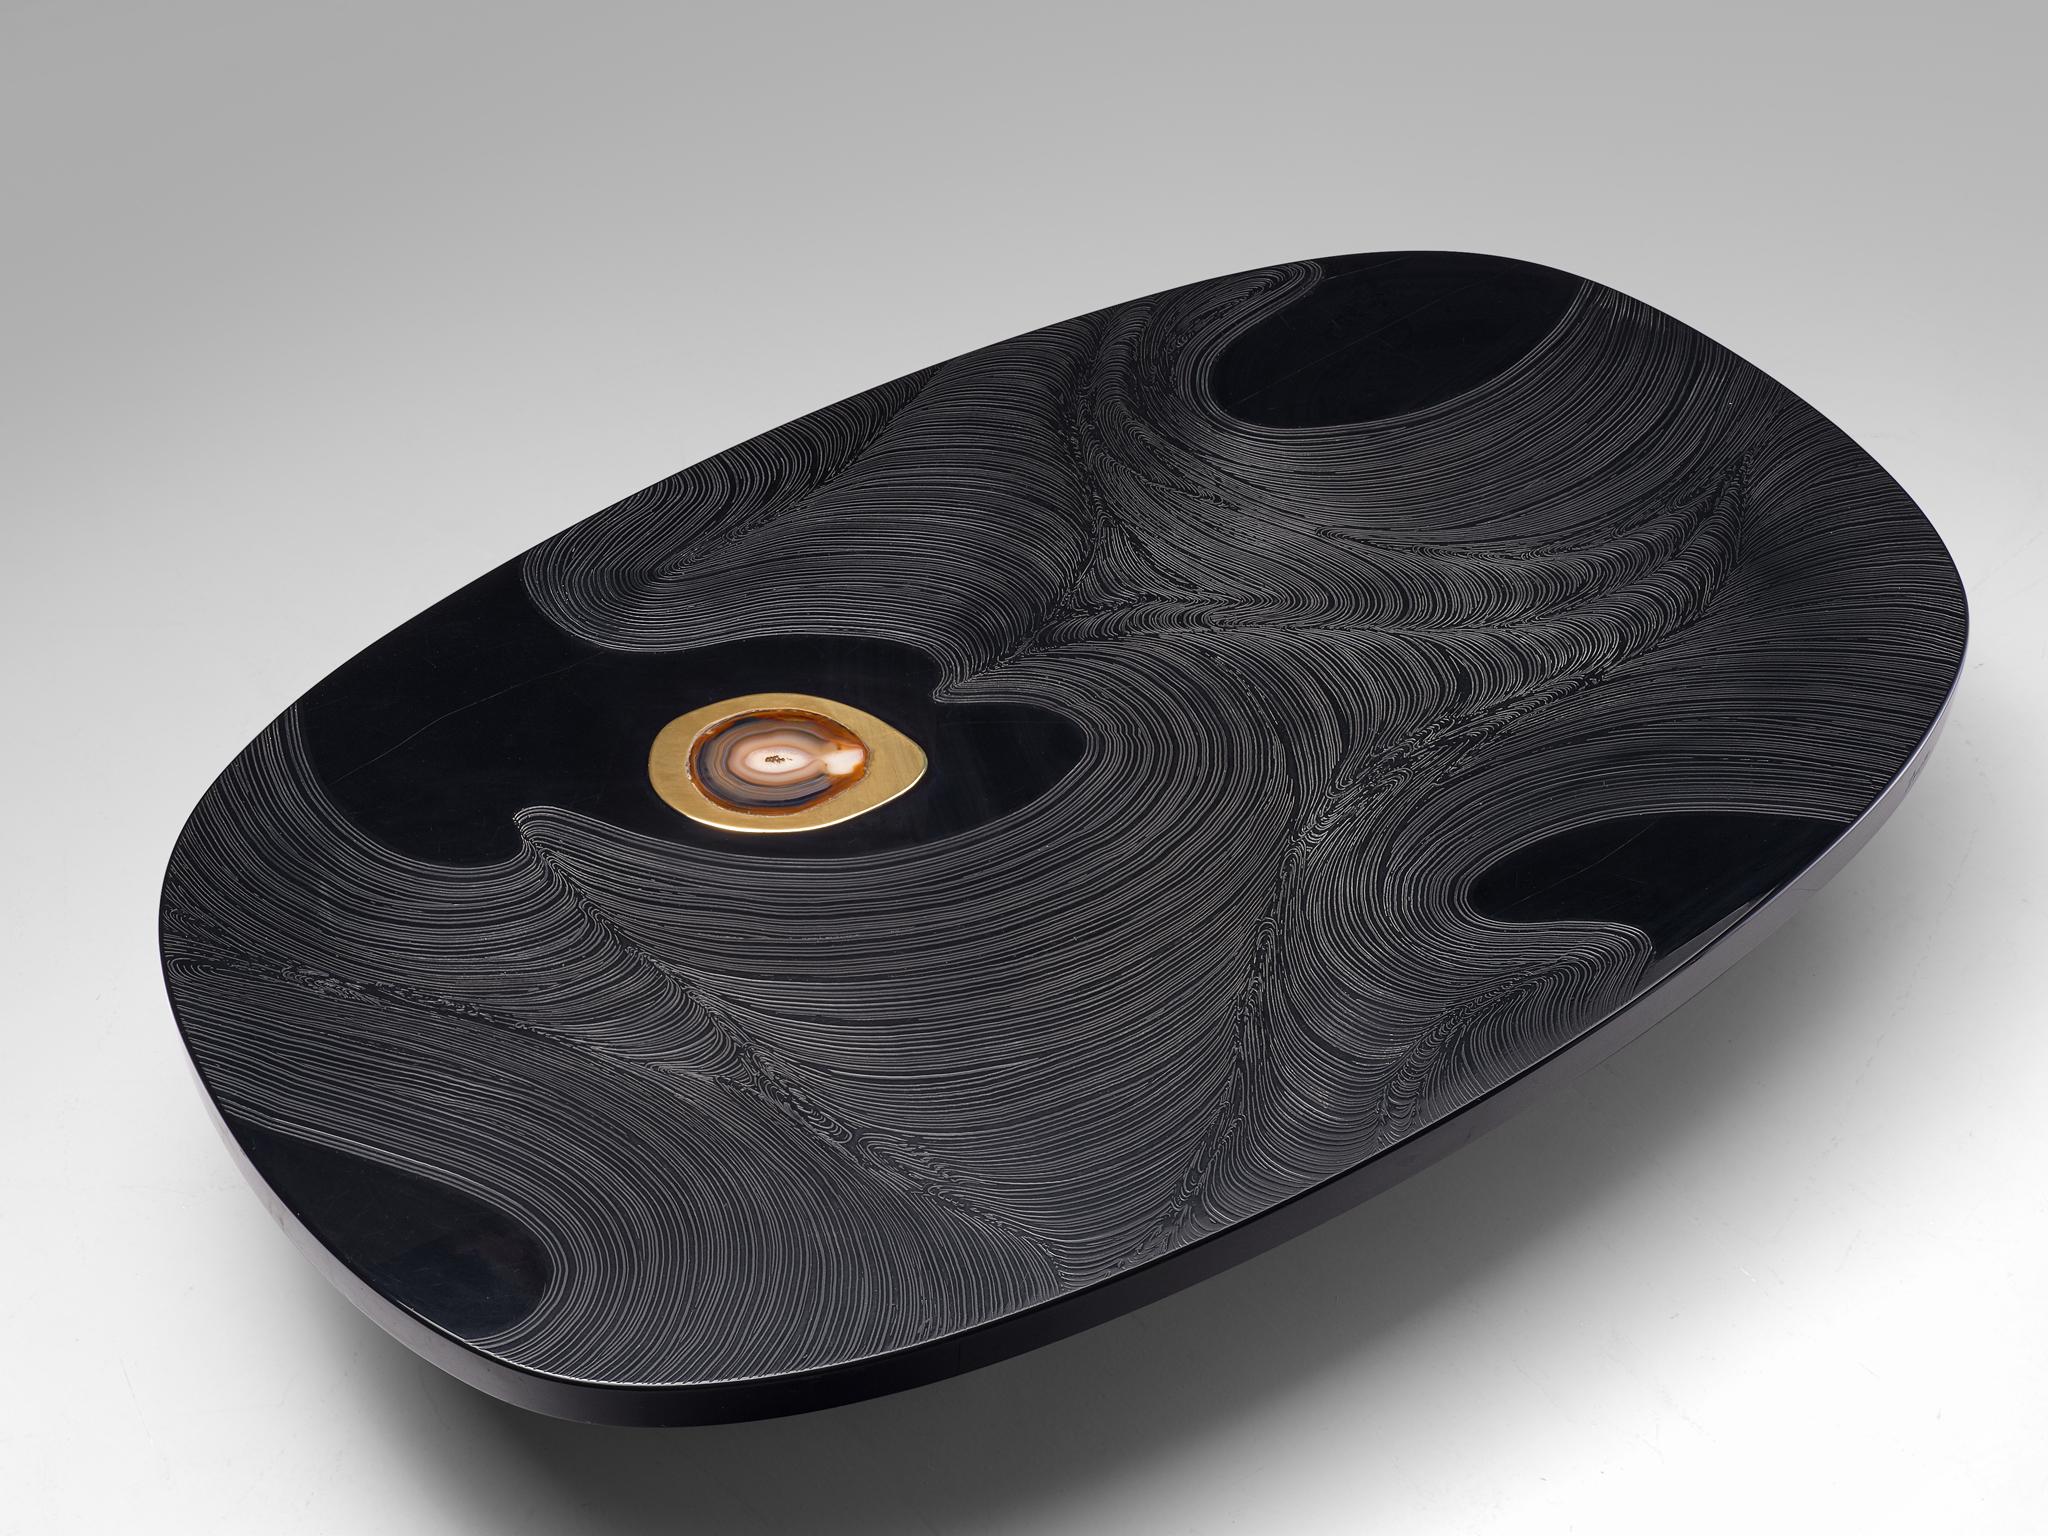 Jean Claude Dresse, coffee table, black resin, agate and steel, Belgium, 1970s

A side table crafted with high attention for detail which is characteristic for the work of the Belgian artist Jean Claude Dresse. This coffee table is executed with a